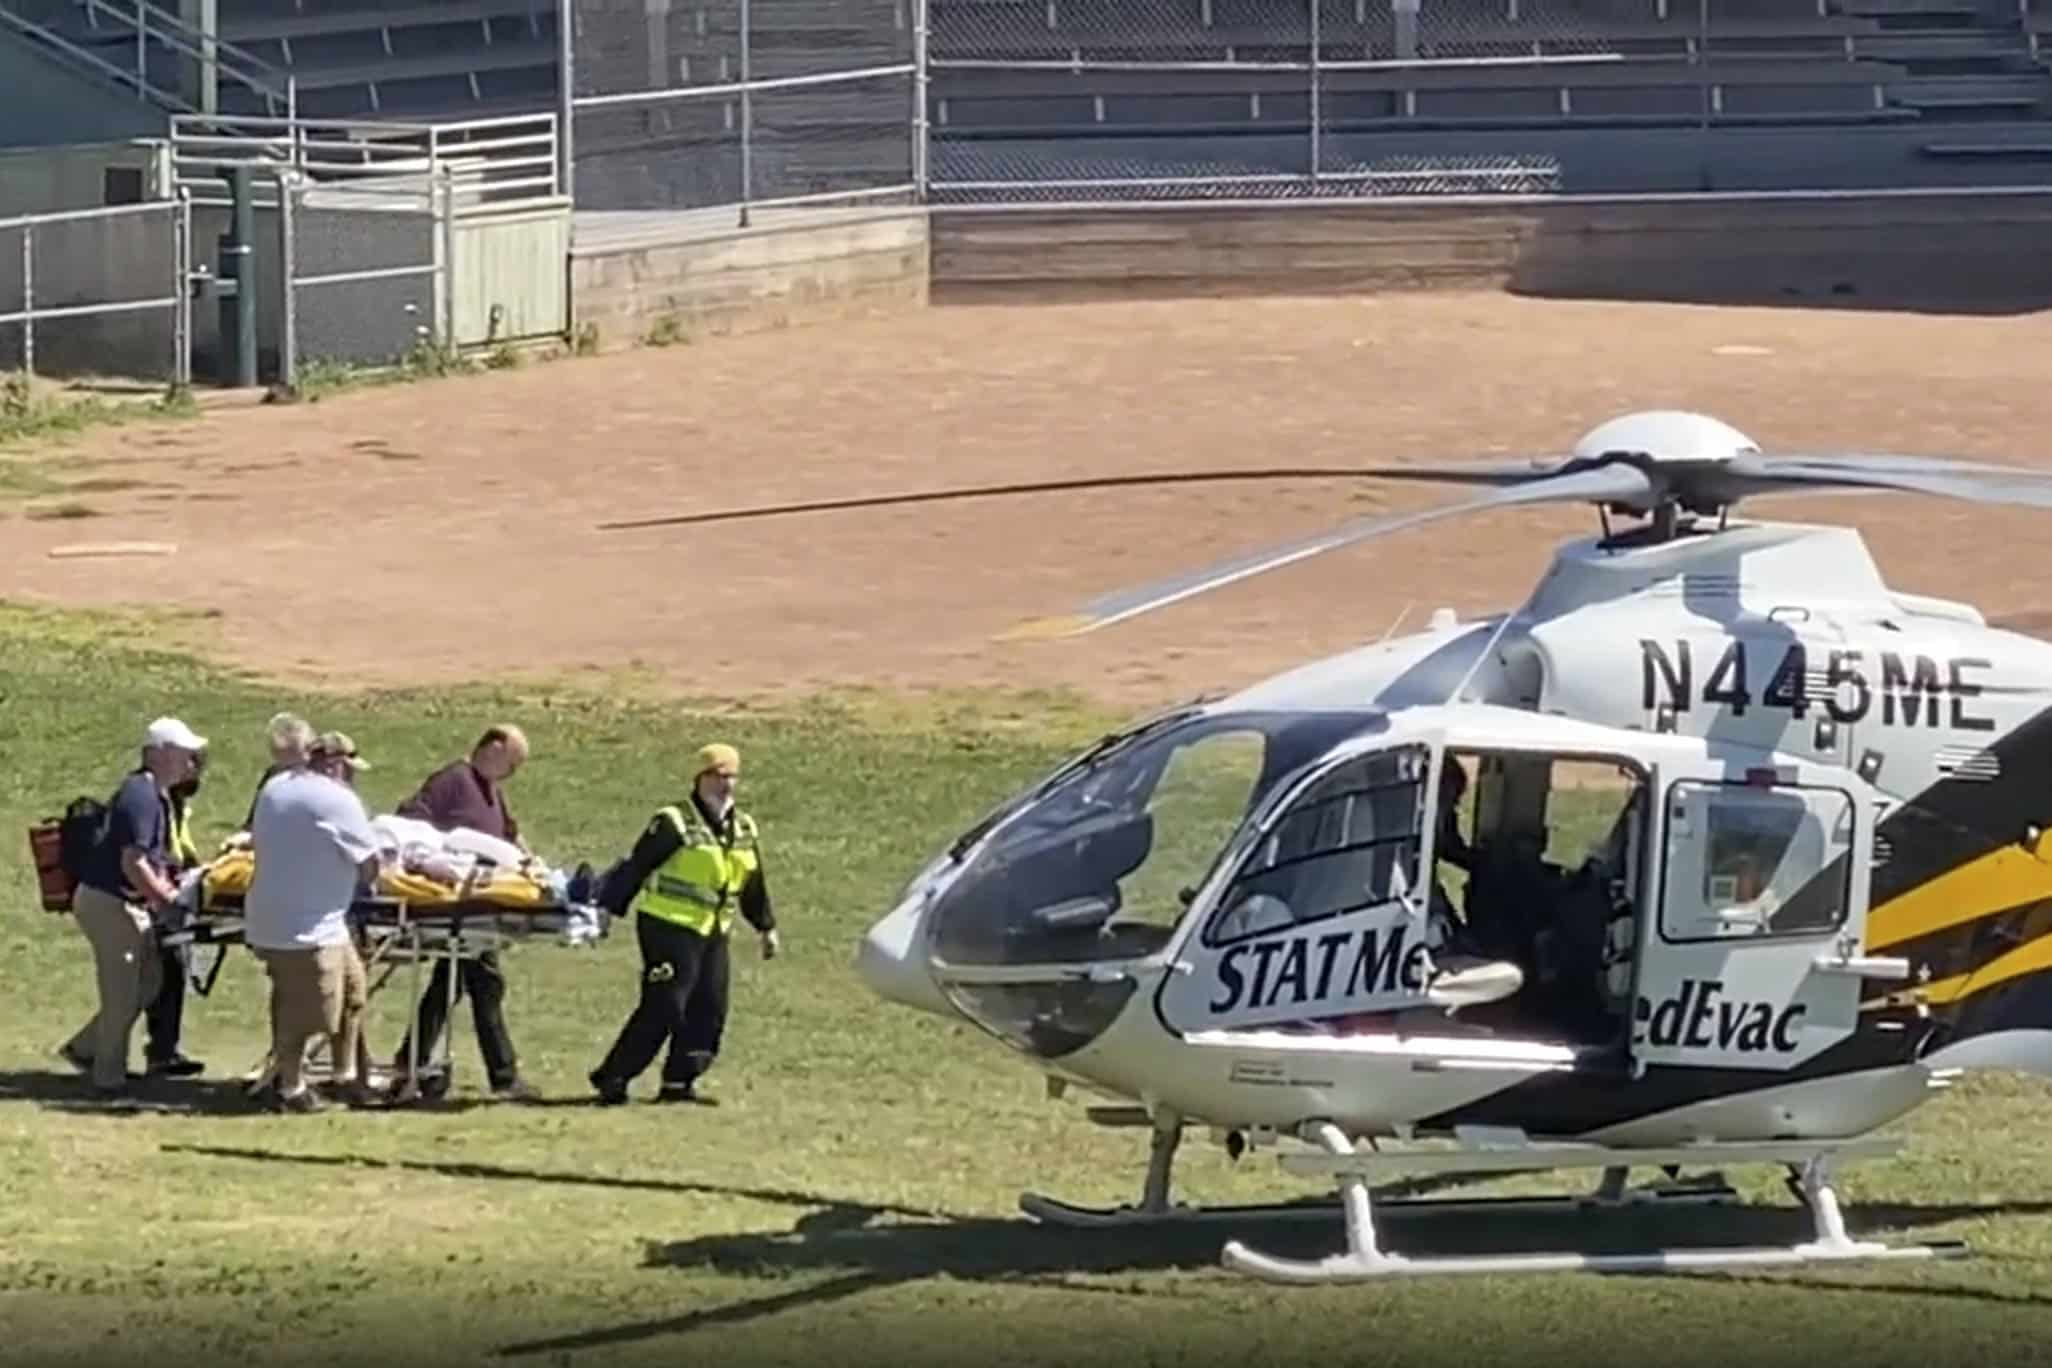 Salman Rushdie is taken on a stretcher to a helicopter for transport to a hospital after he was attacked during a lecture at the Chautauqua Institution in Chautauqua, N.Y., Friday, Aug. 12, 2022. (AP Photo)/NYAJ501/22224580016117//2208122021